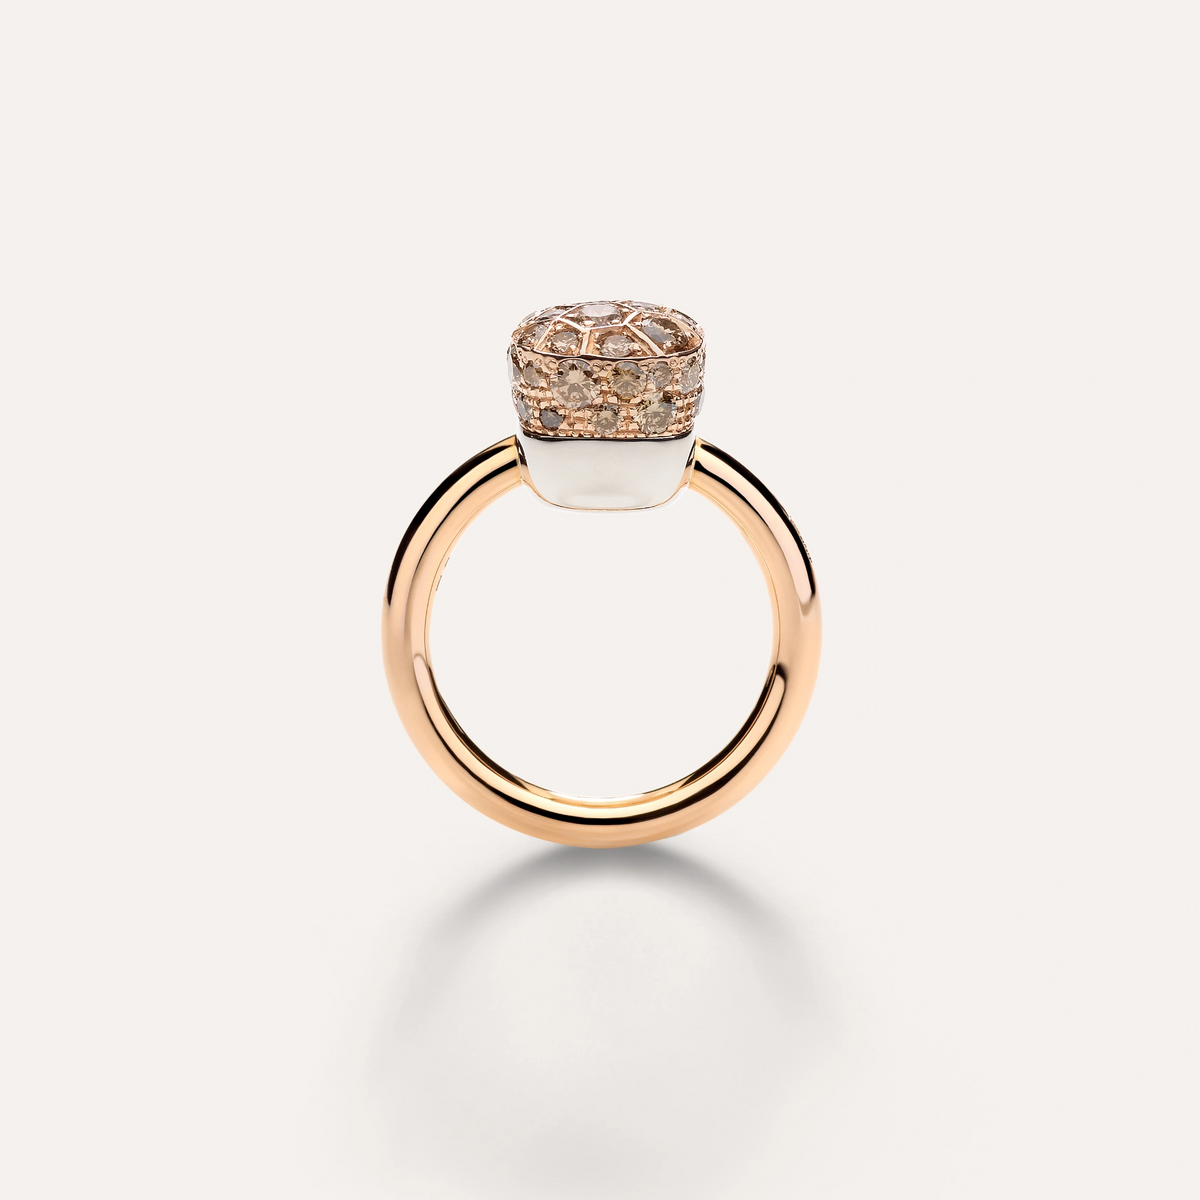 Side View Pomellato Nudo Petit Ring in 18k Gold with Brown Diamonds